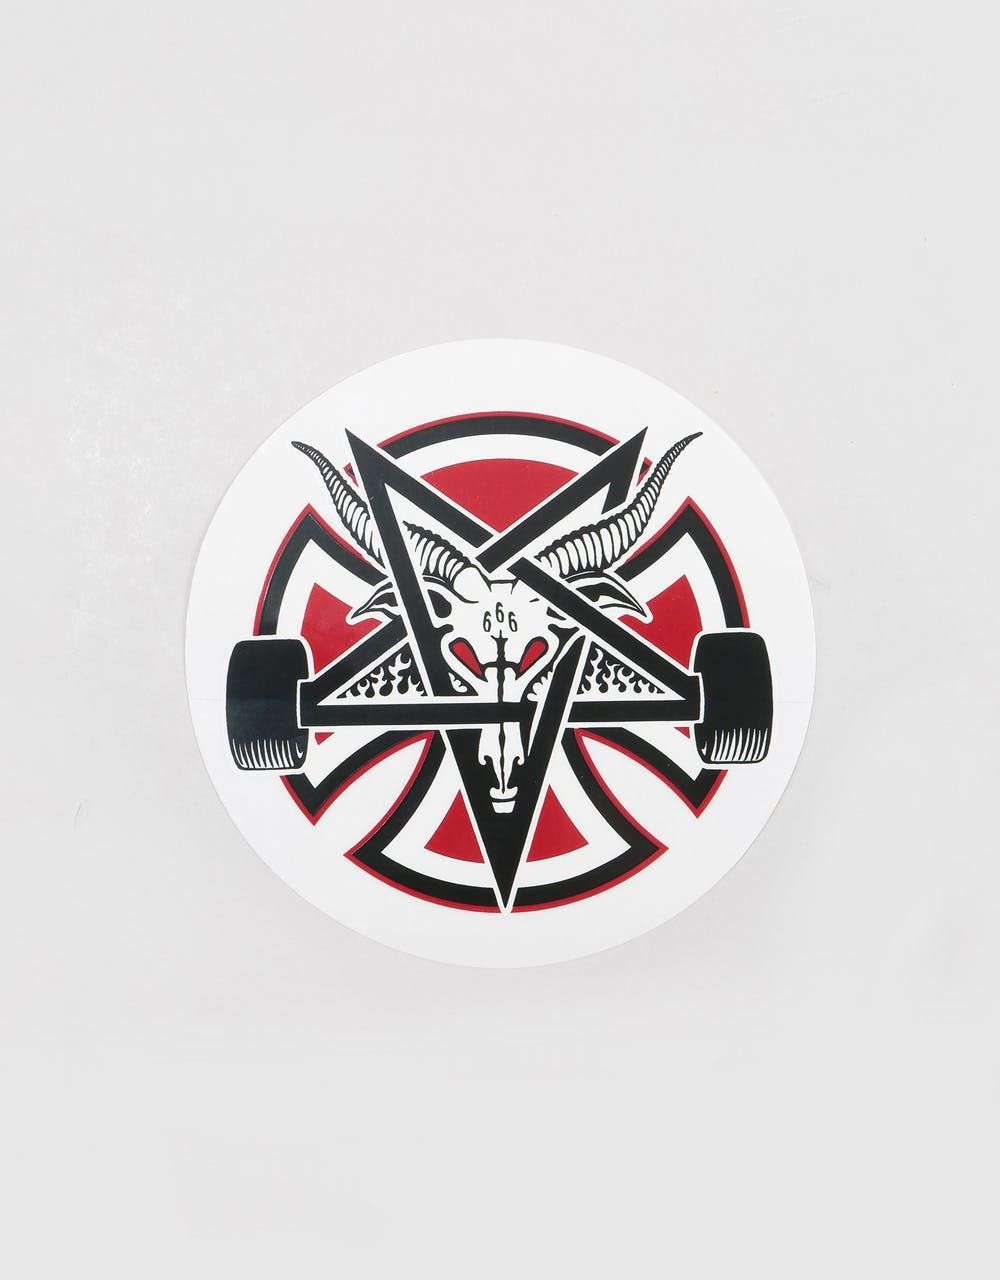 Slap the Independent x Thrasher Pentagram Cross Sticker on your laptop, your bedroom wall, the bottom of your deck or ev. Truck tattoo, Thrasher, Sticker supplies